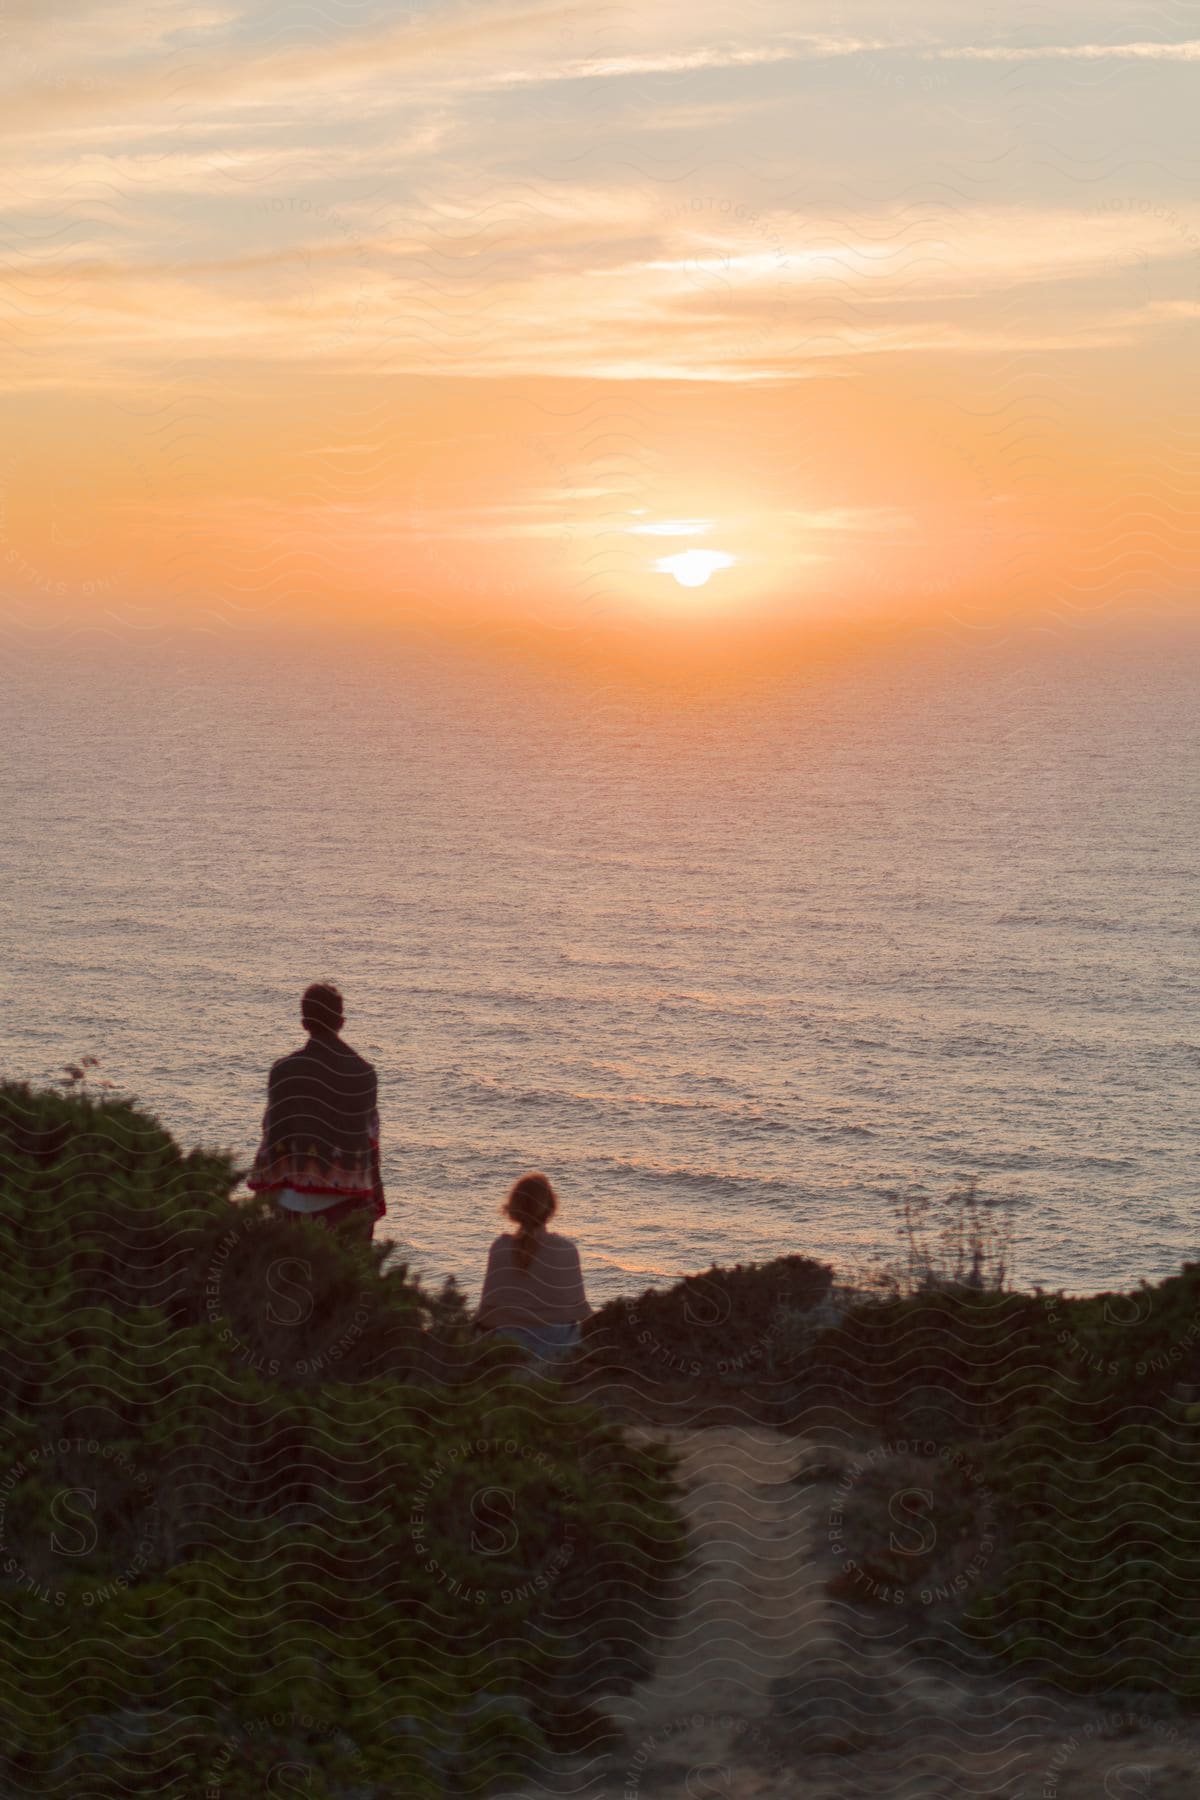 Two people sitting outdoors watching the sunrise.